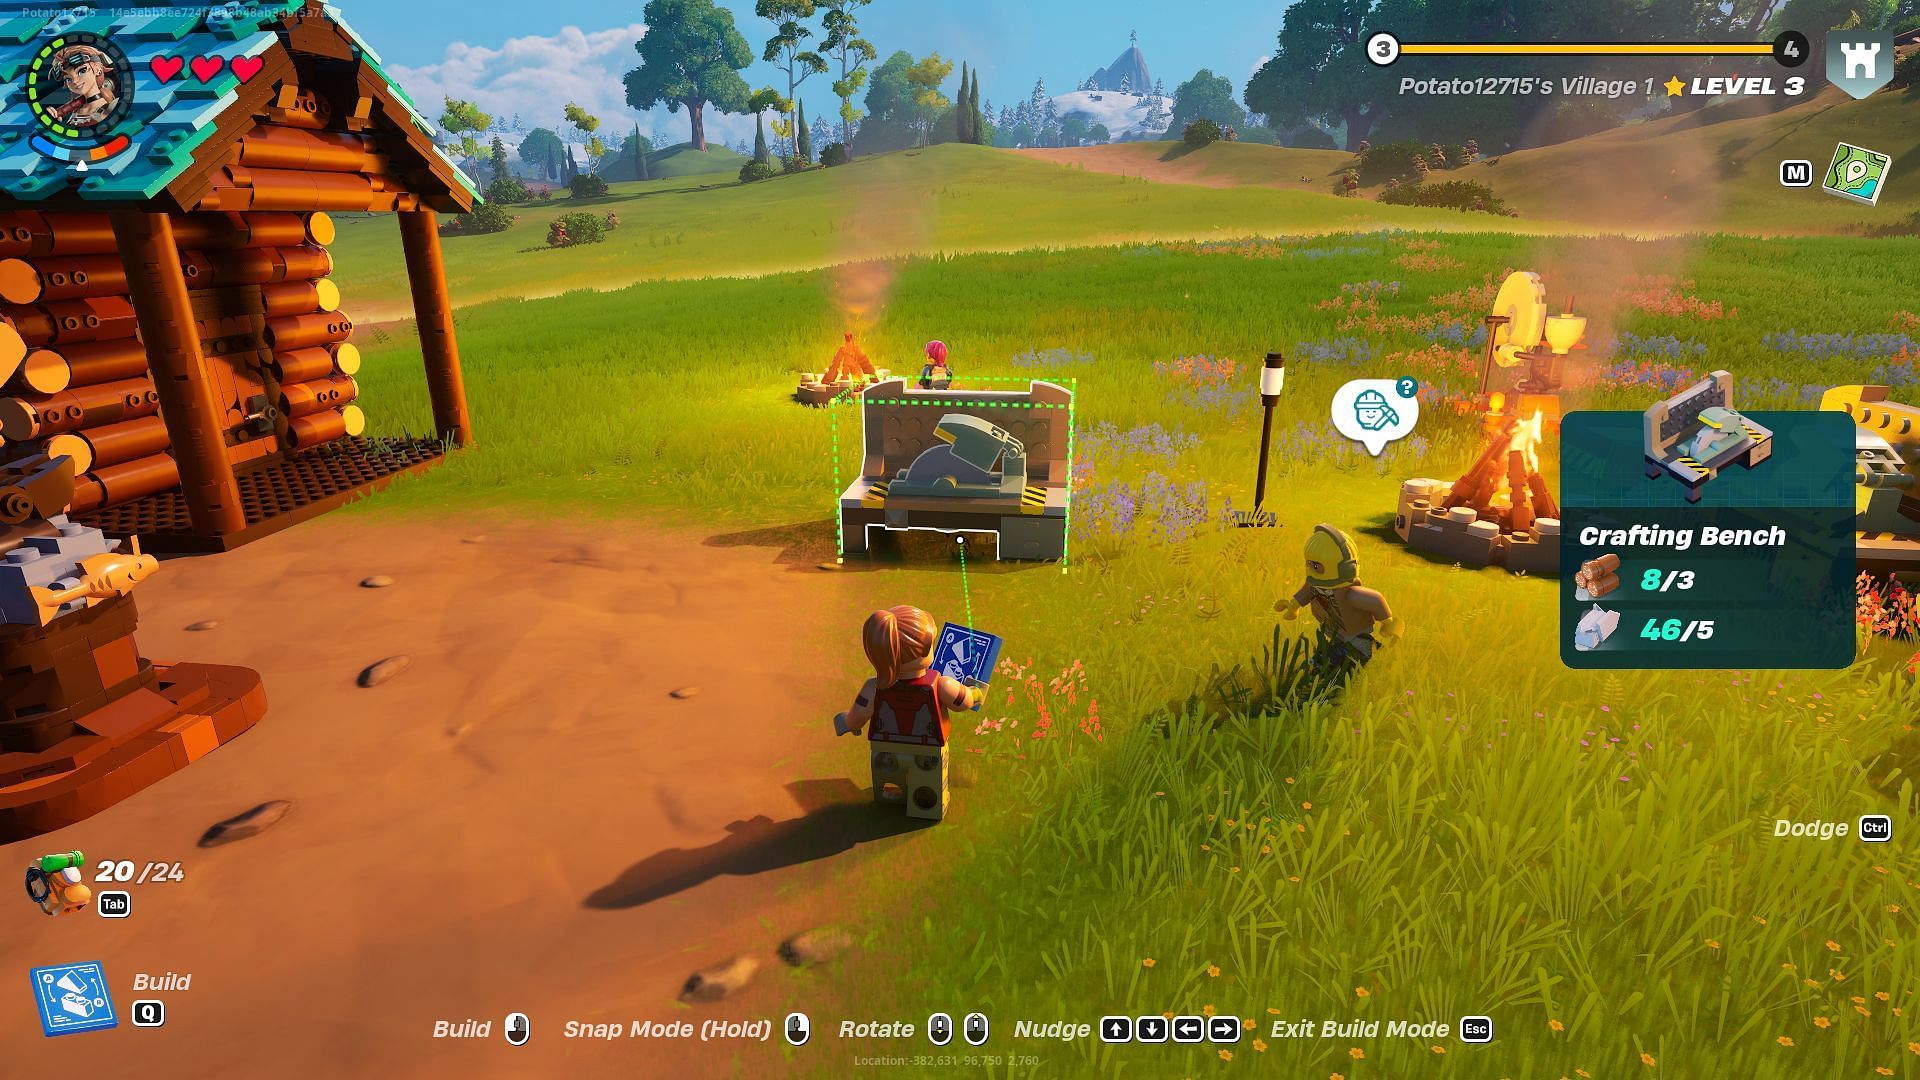 Build a Crafting Bench within the village's boundary. (Image via Epic Games)